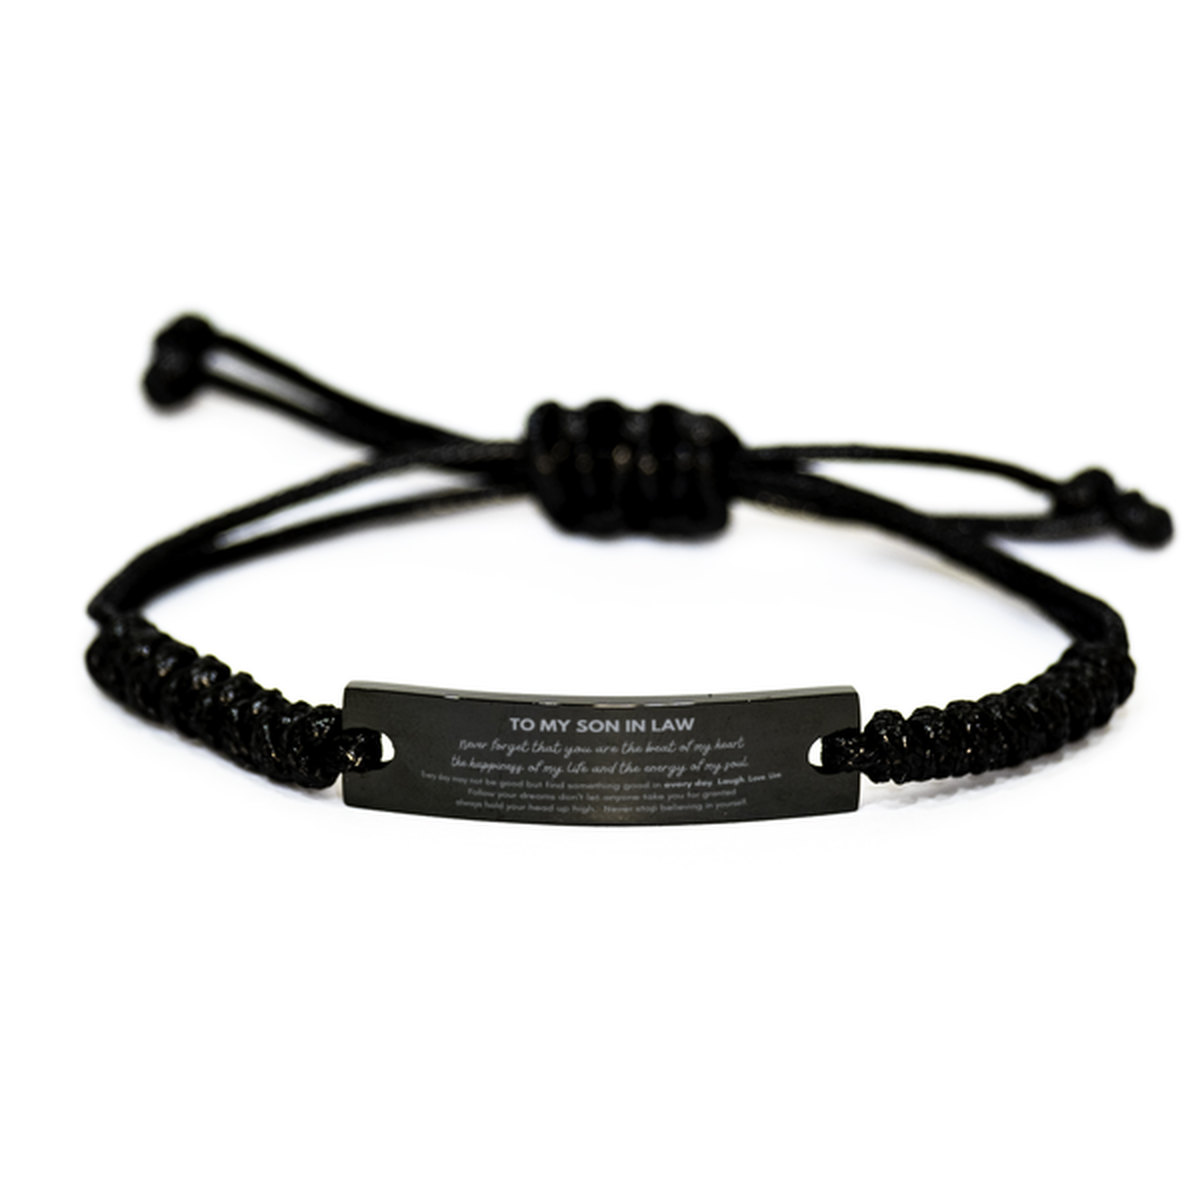 To My Son In Law Bracelet Gifts, Christmas Son In Law Black Rope Bracelet Present, Birthday Unique Motivational For Son In Law, To My Son In Law Never forget that you are the beat of my heart the happiness of my life and the energy of my soul